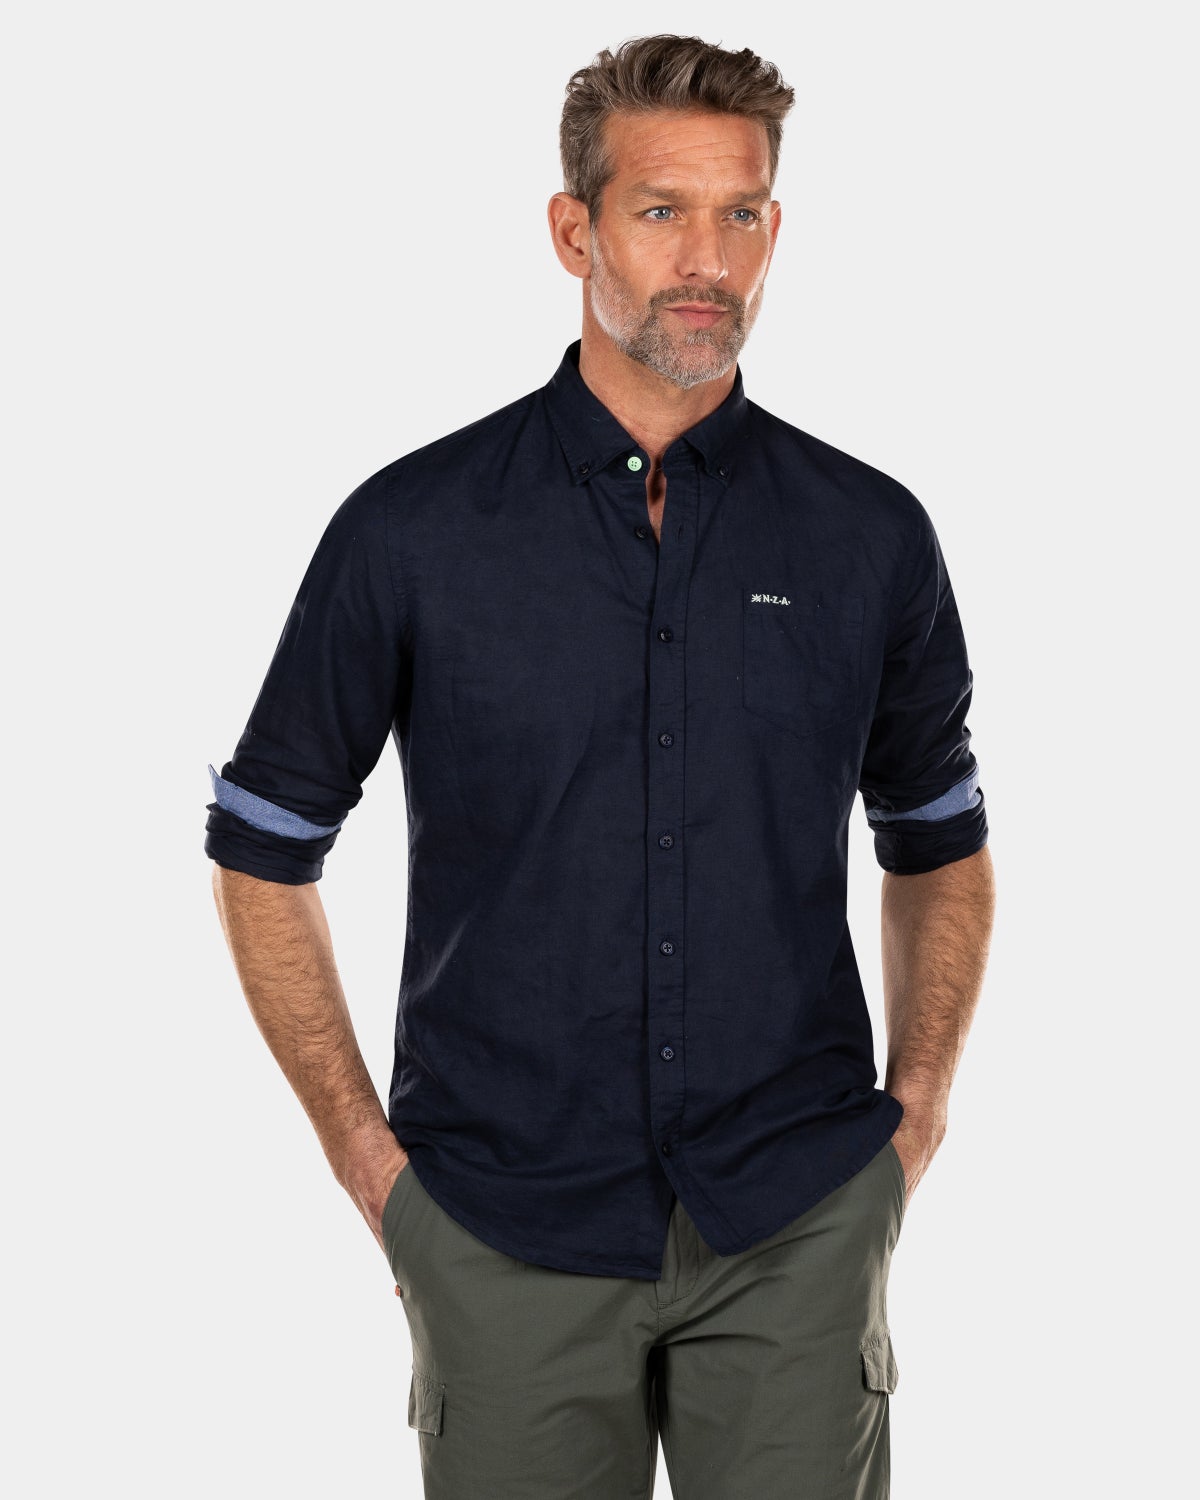 Plain linen shirt in many colors - Traditional Navy